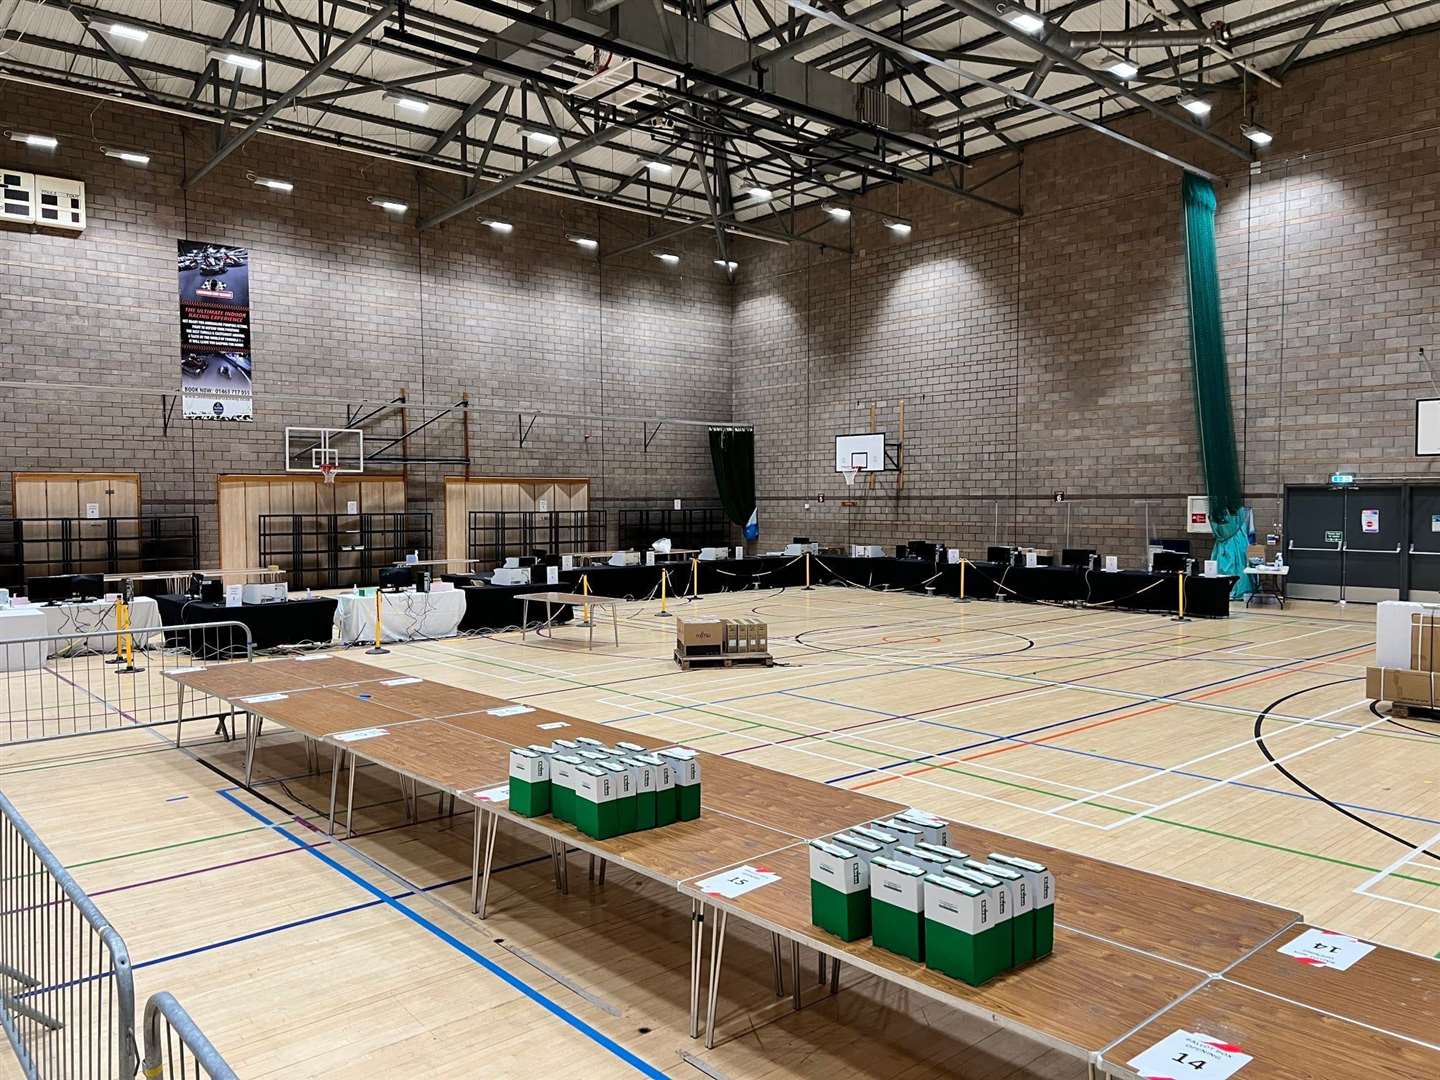 Behind the scene for the count at Highland Council